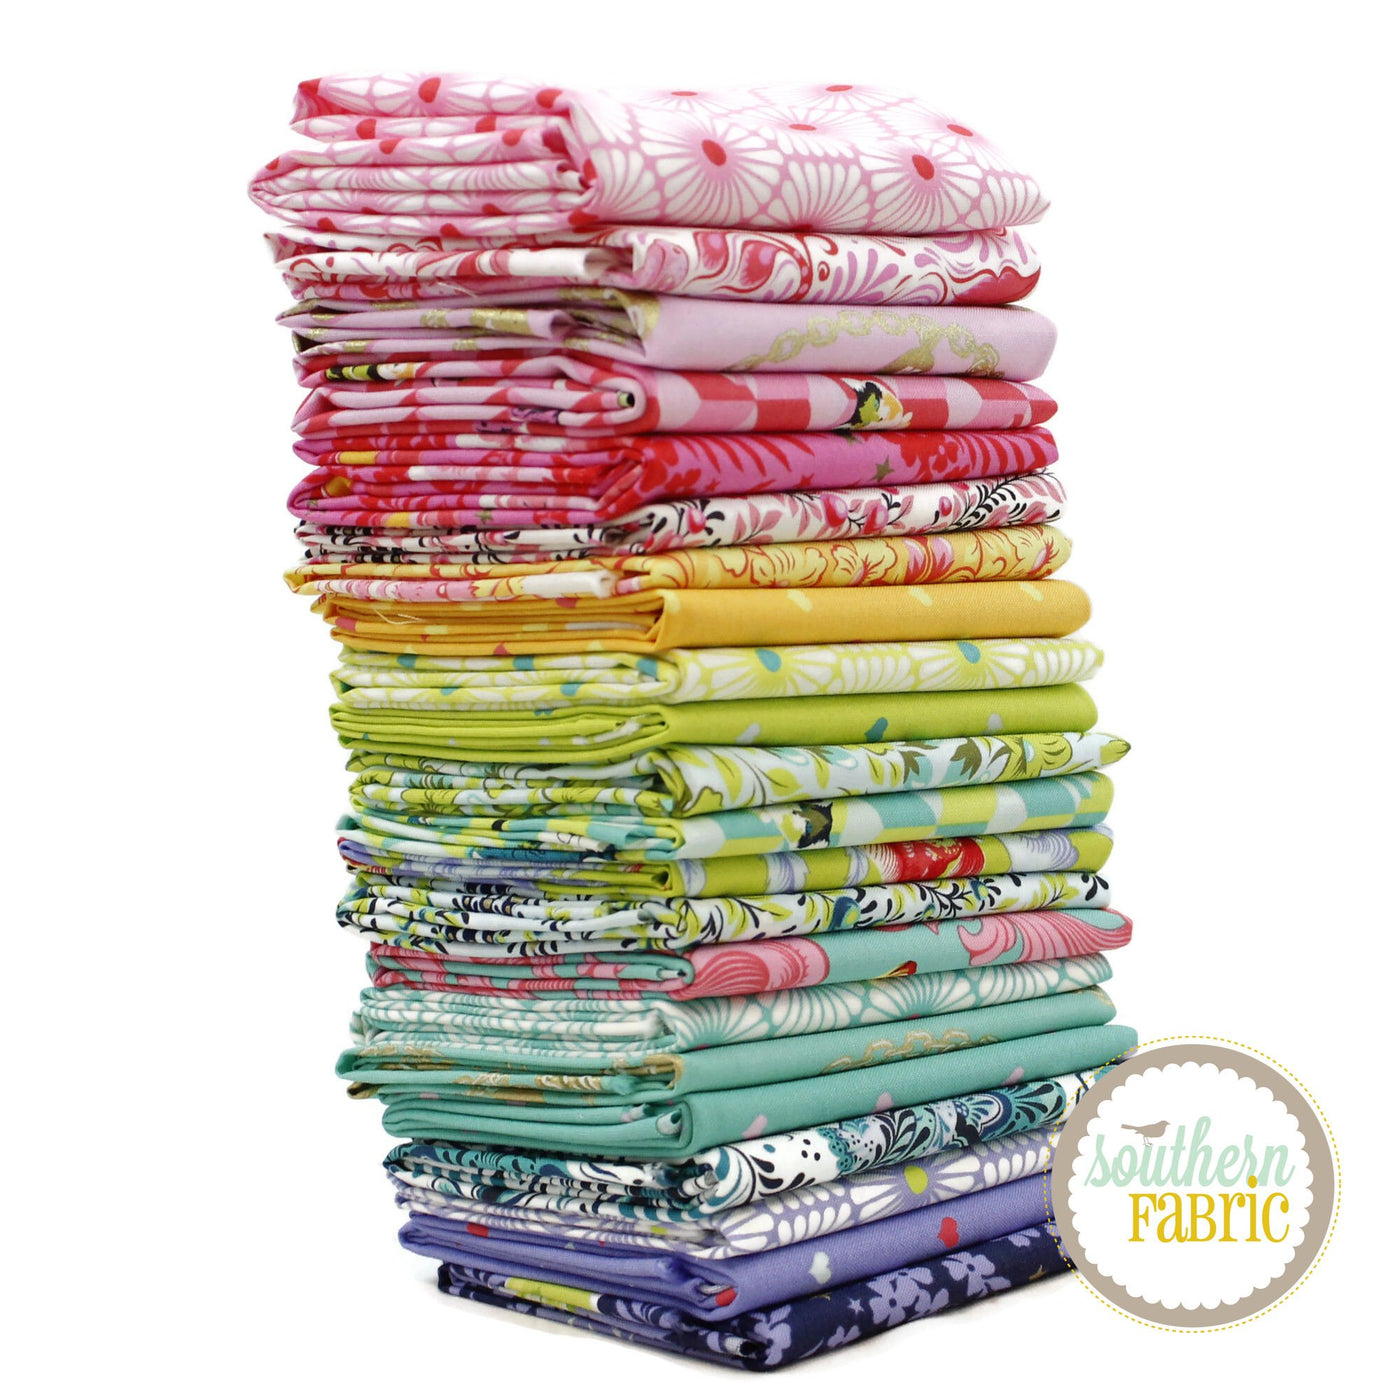 Besties Fat Quarter Bundle (22 pcs) by Tula Pink for Free Spirit (TP.BE.FQ)